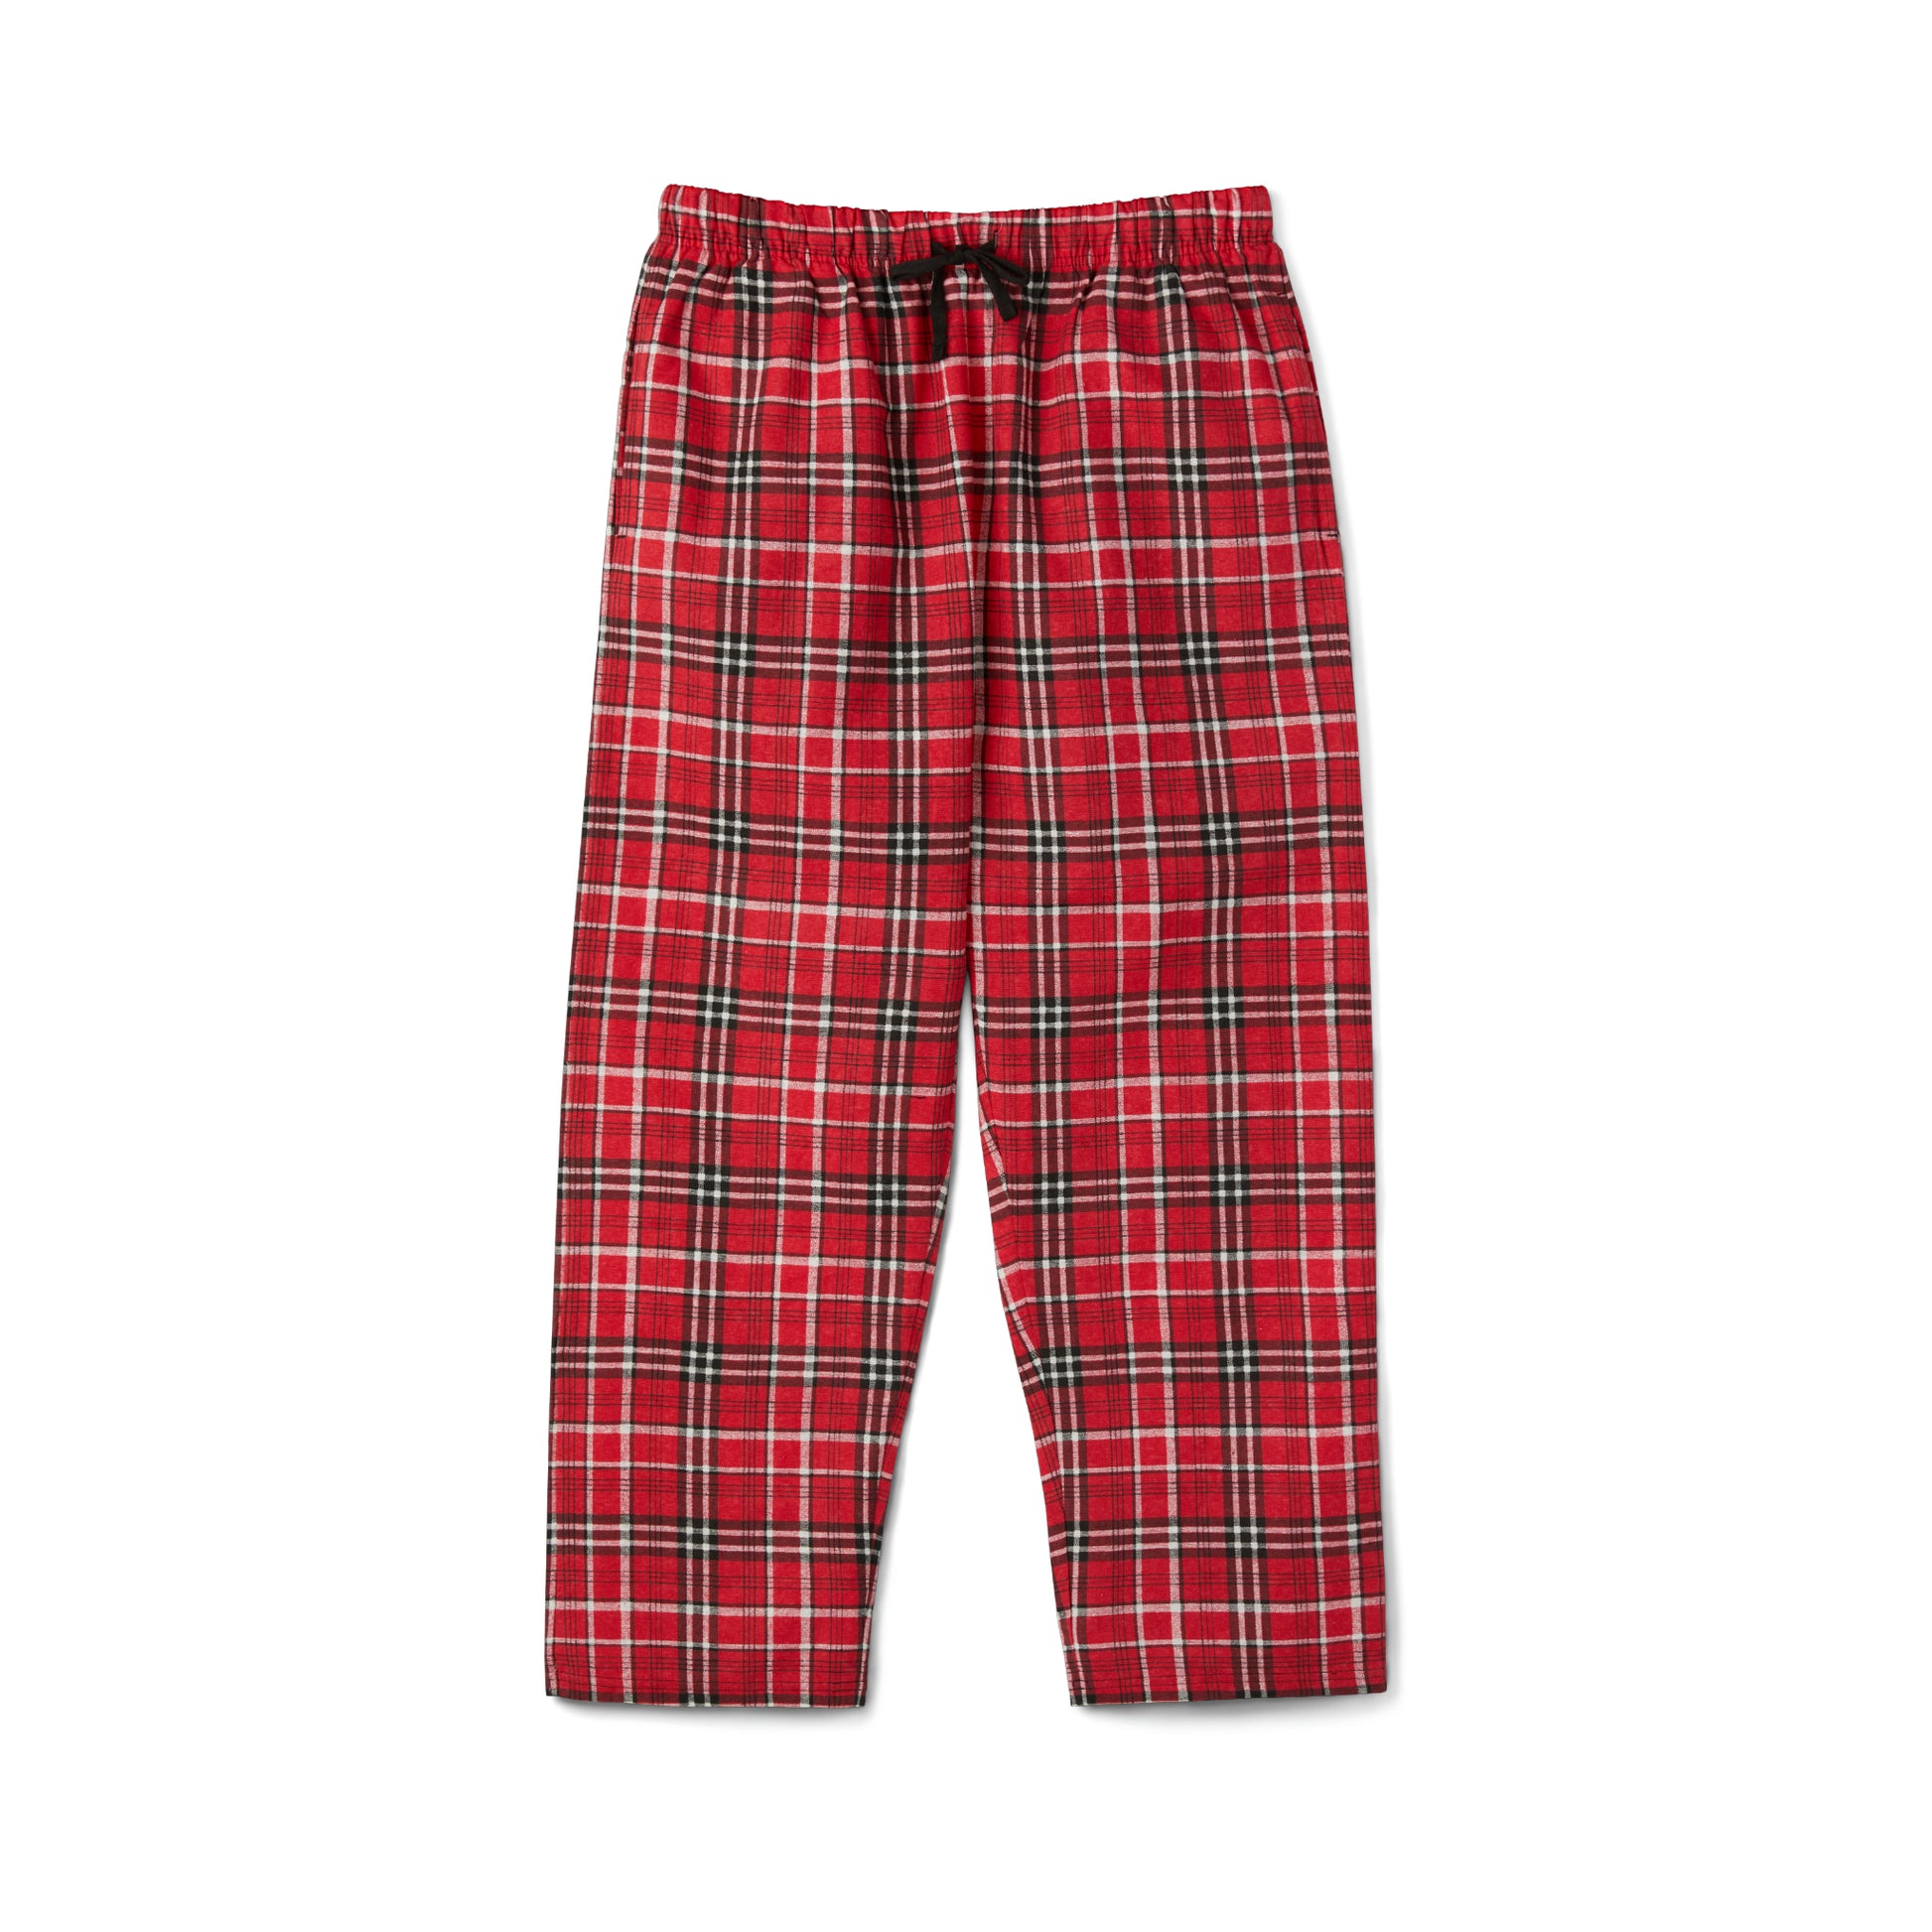 These Printify Men's Long-Sleeve Pajama-Set in red and black plaid are made from 100% cotton, perfect for lounging around in comfort.